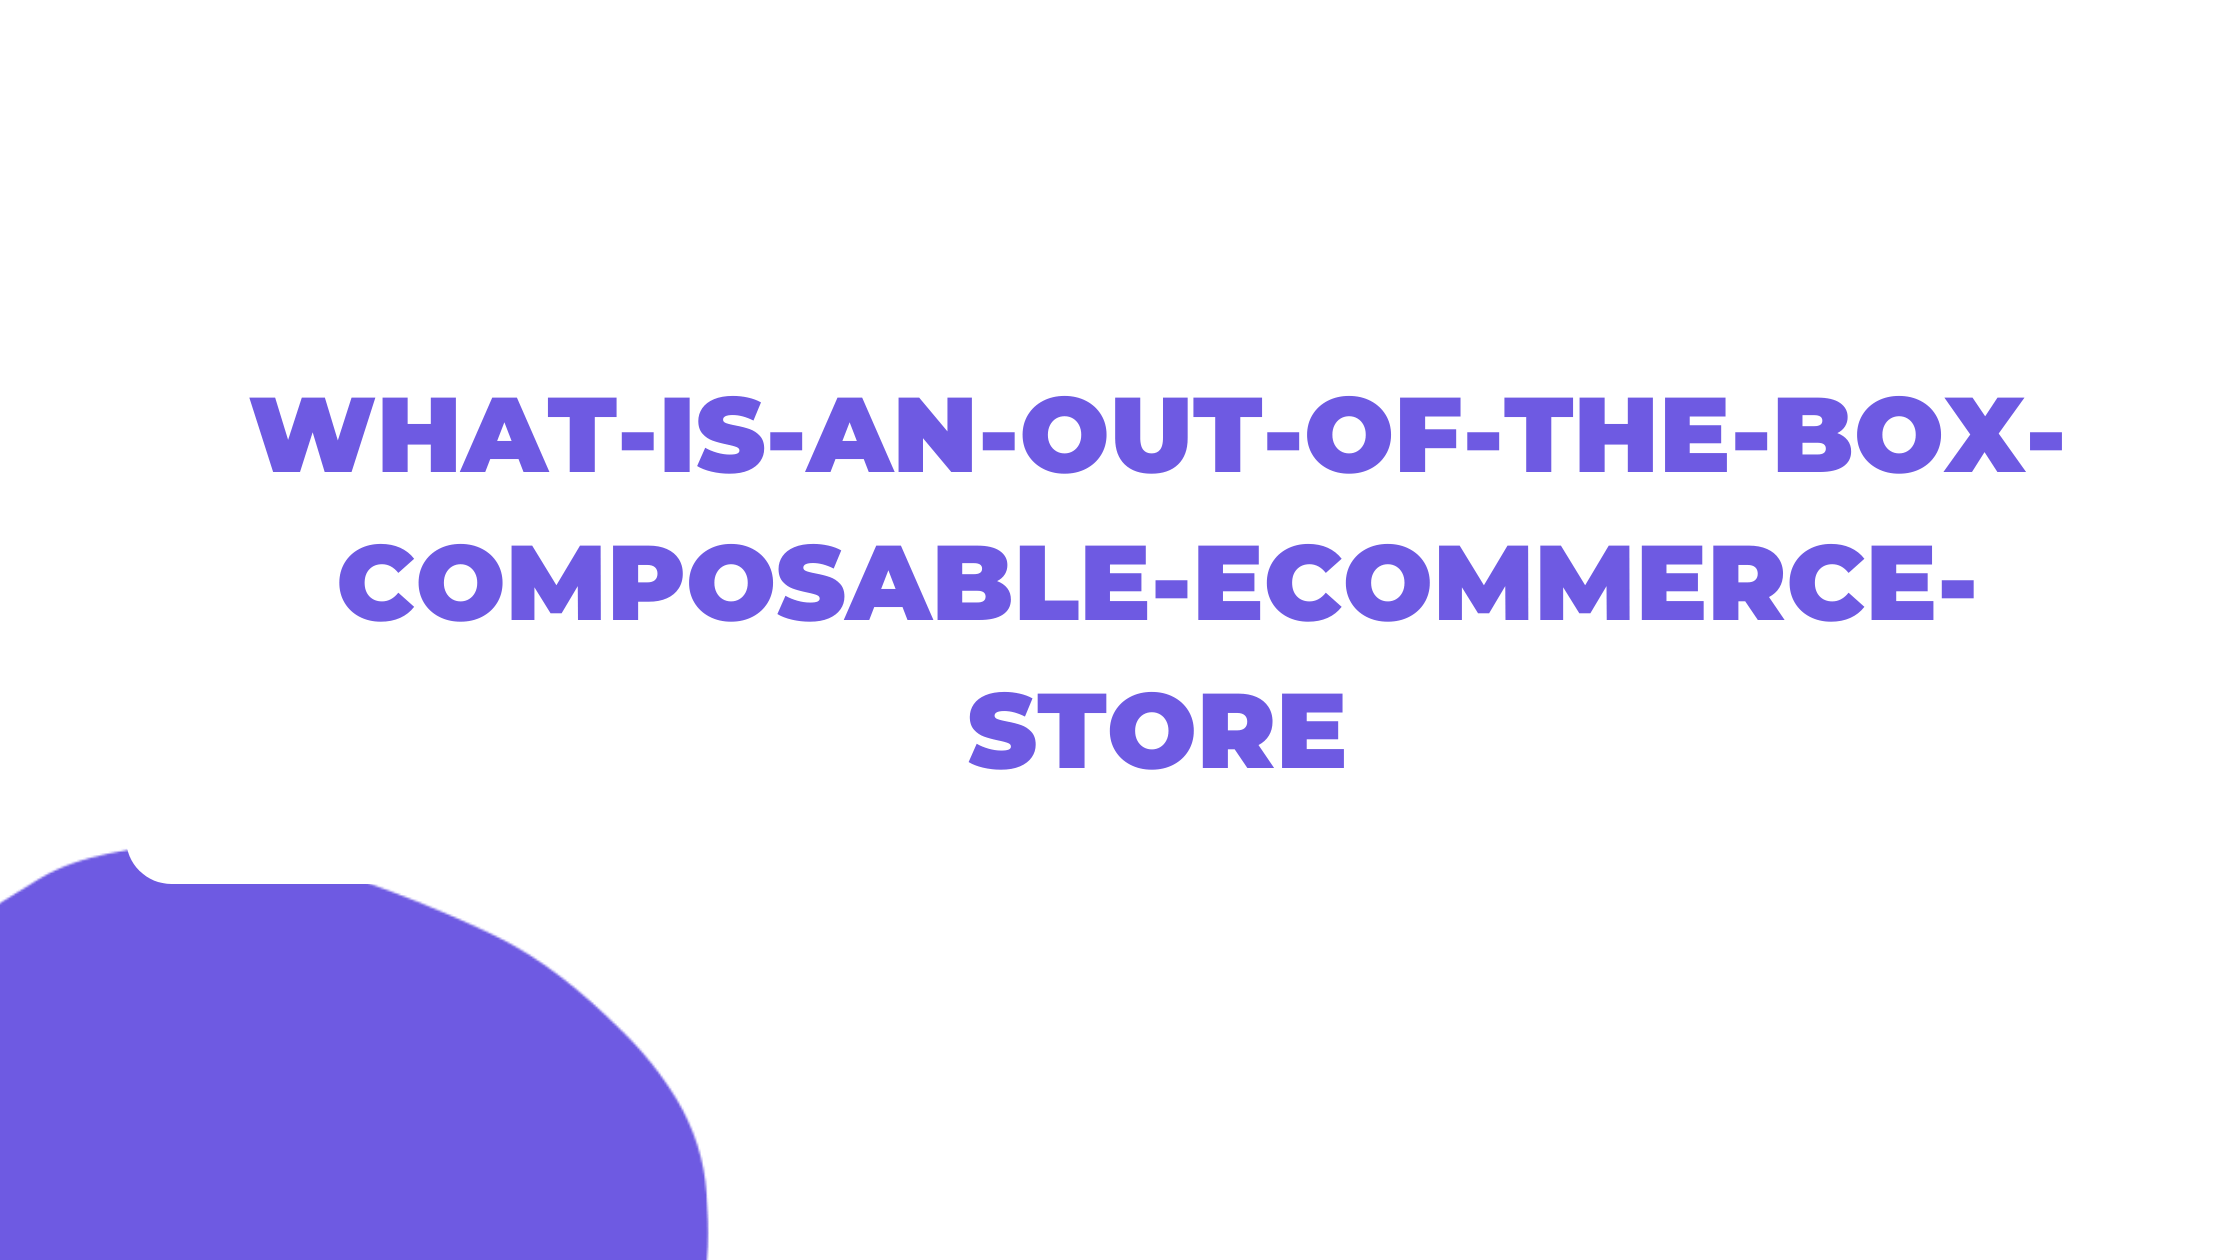 What-is-an-out-of-the-box-composable-ecommerce-store